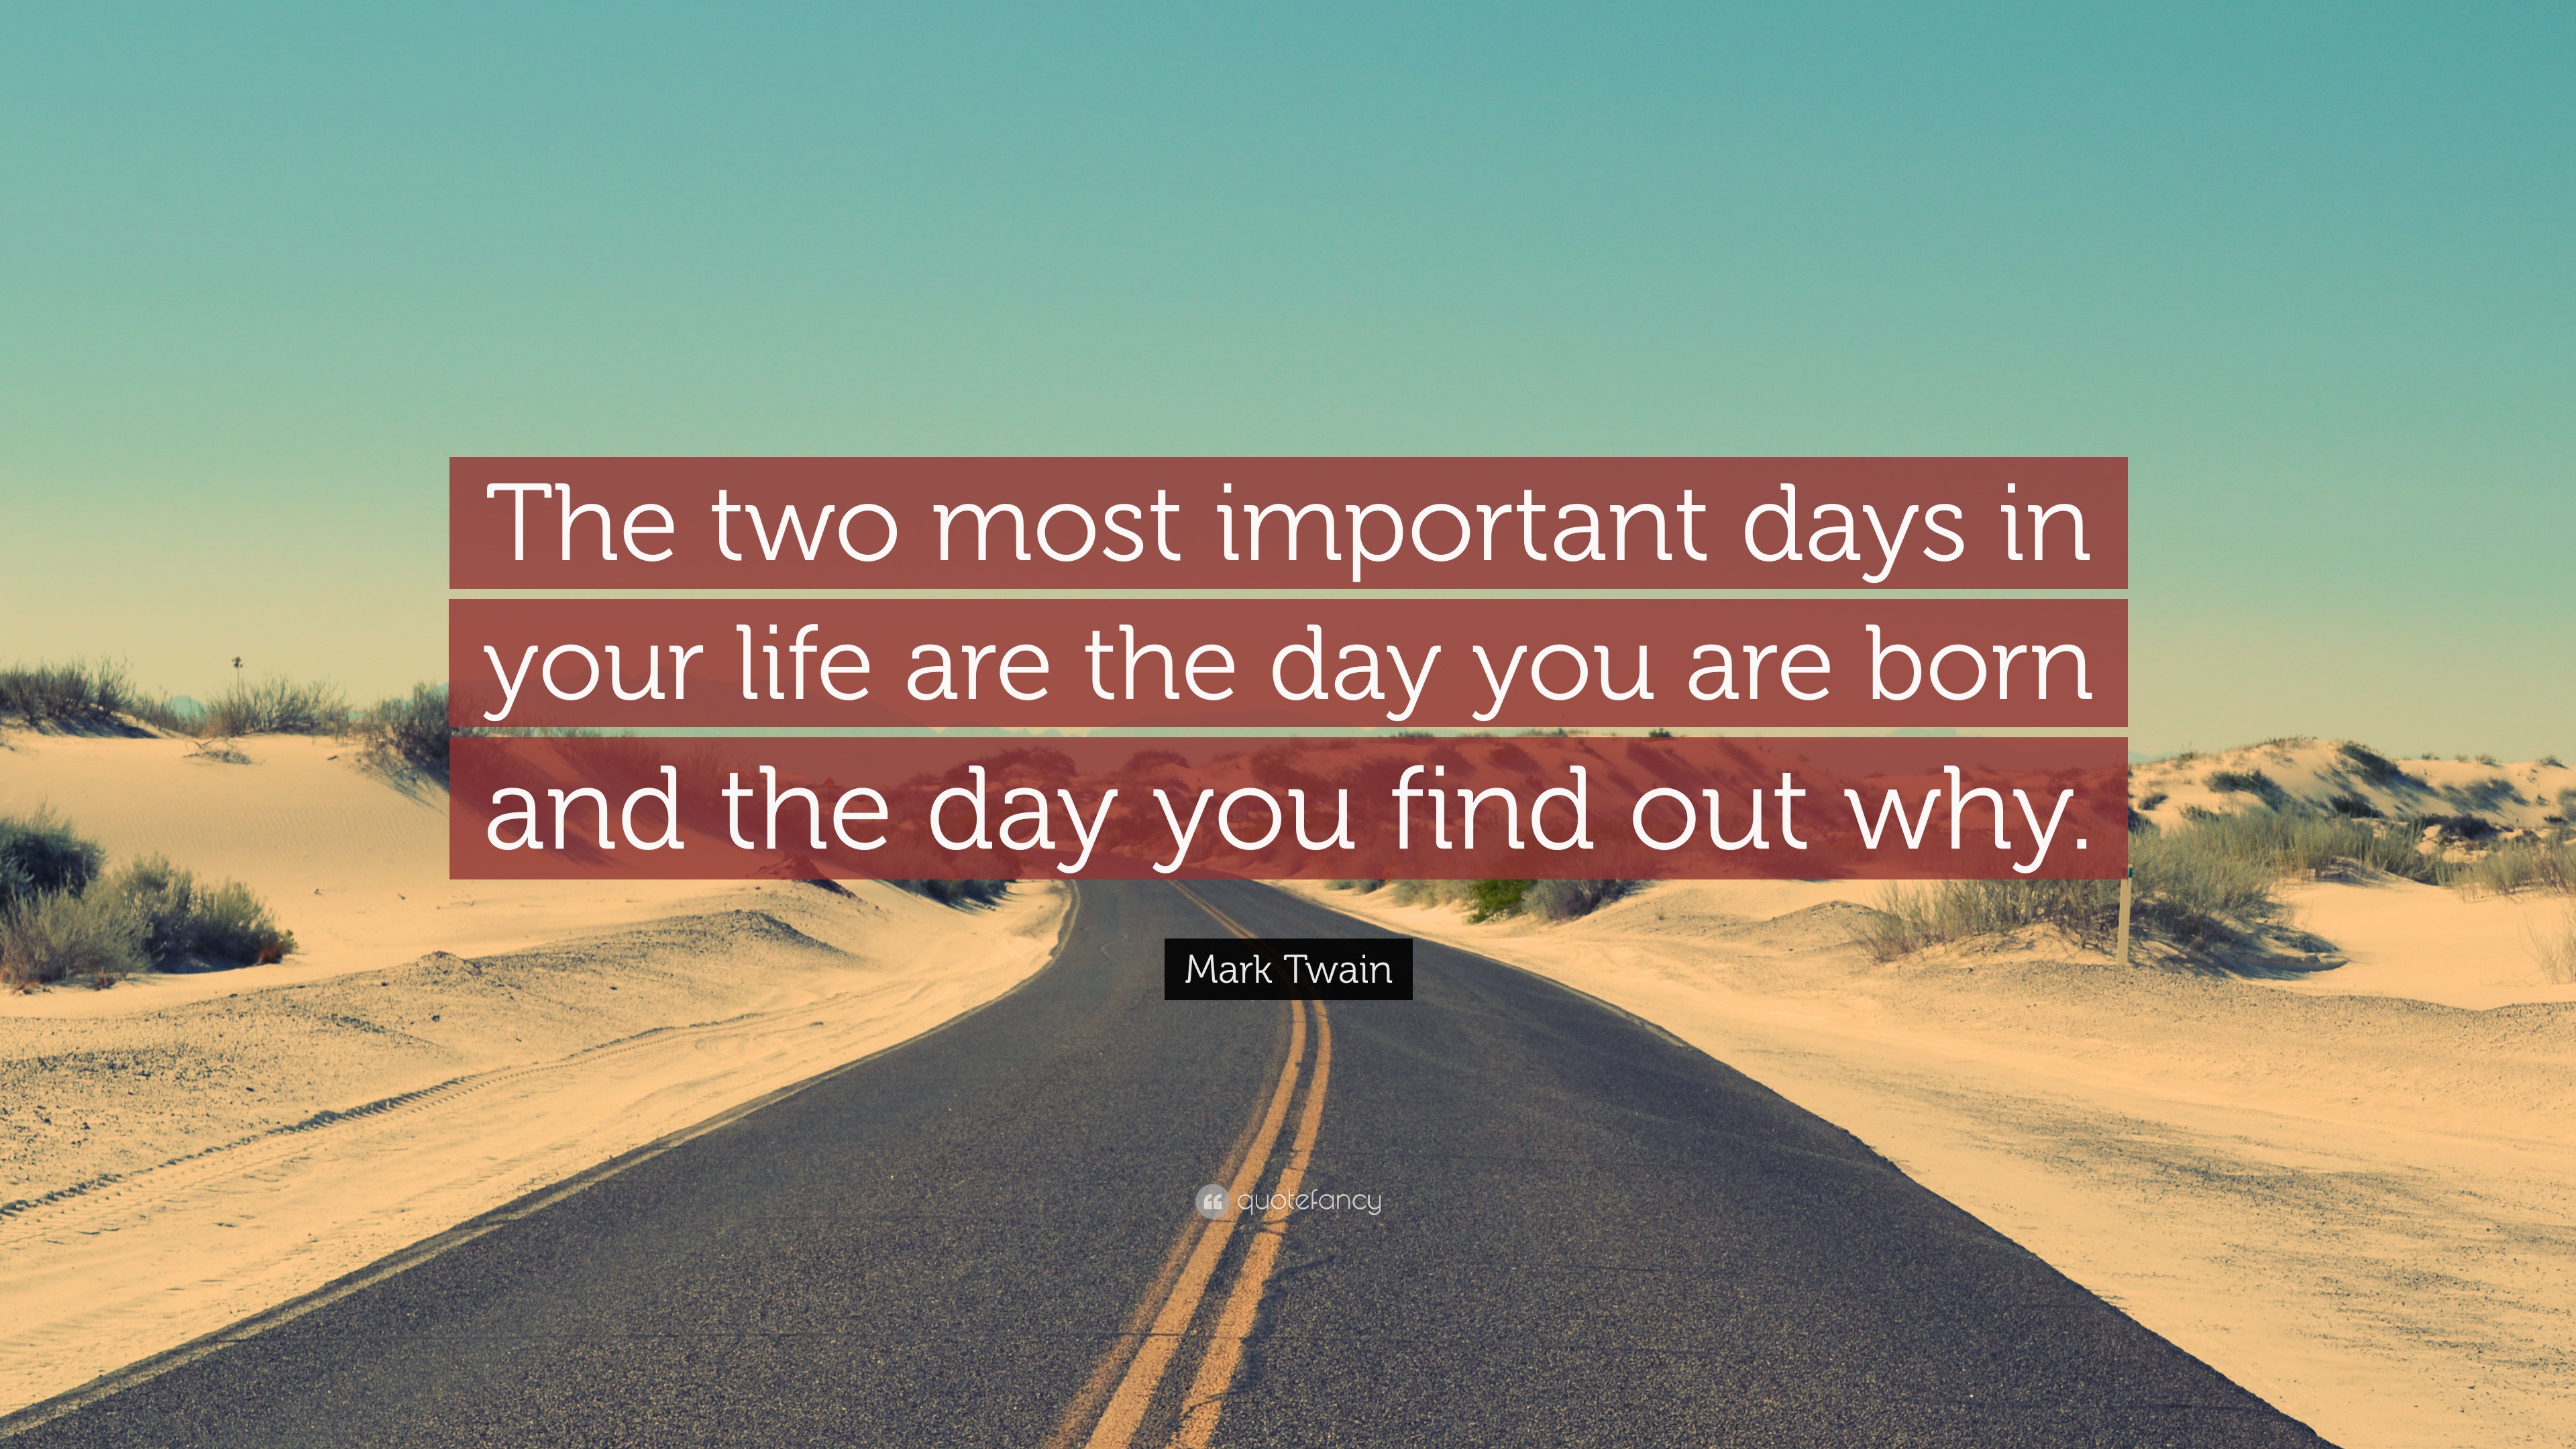 Mark Twain Quote: “The two most important days in your life are the day ...